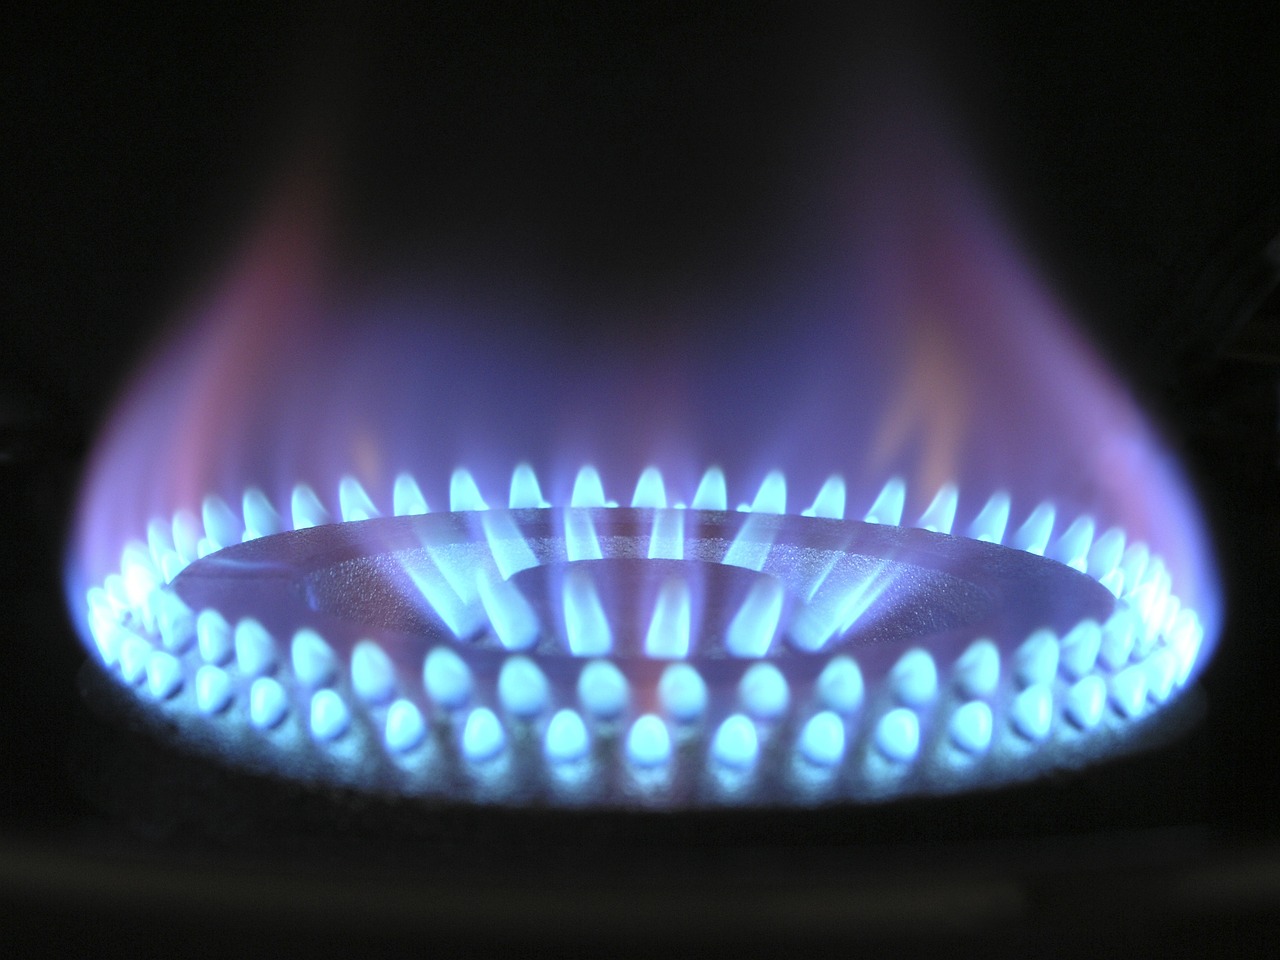 Are energy price rises being “driven by gas”?